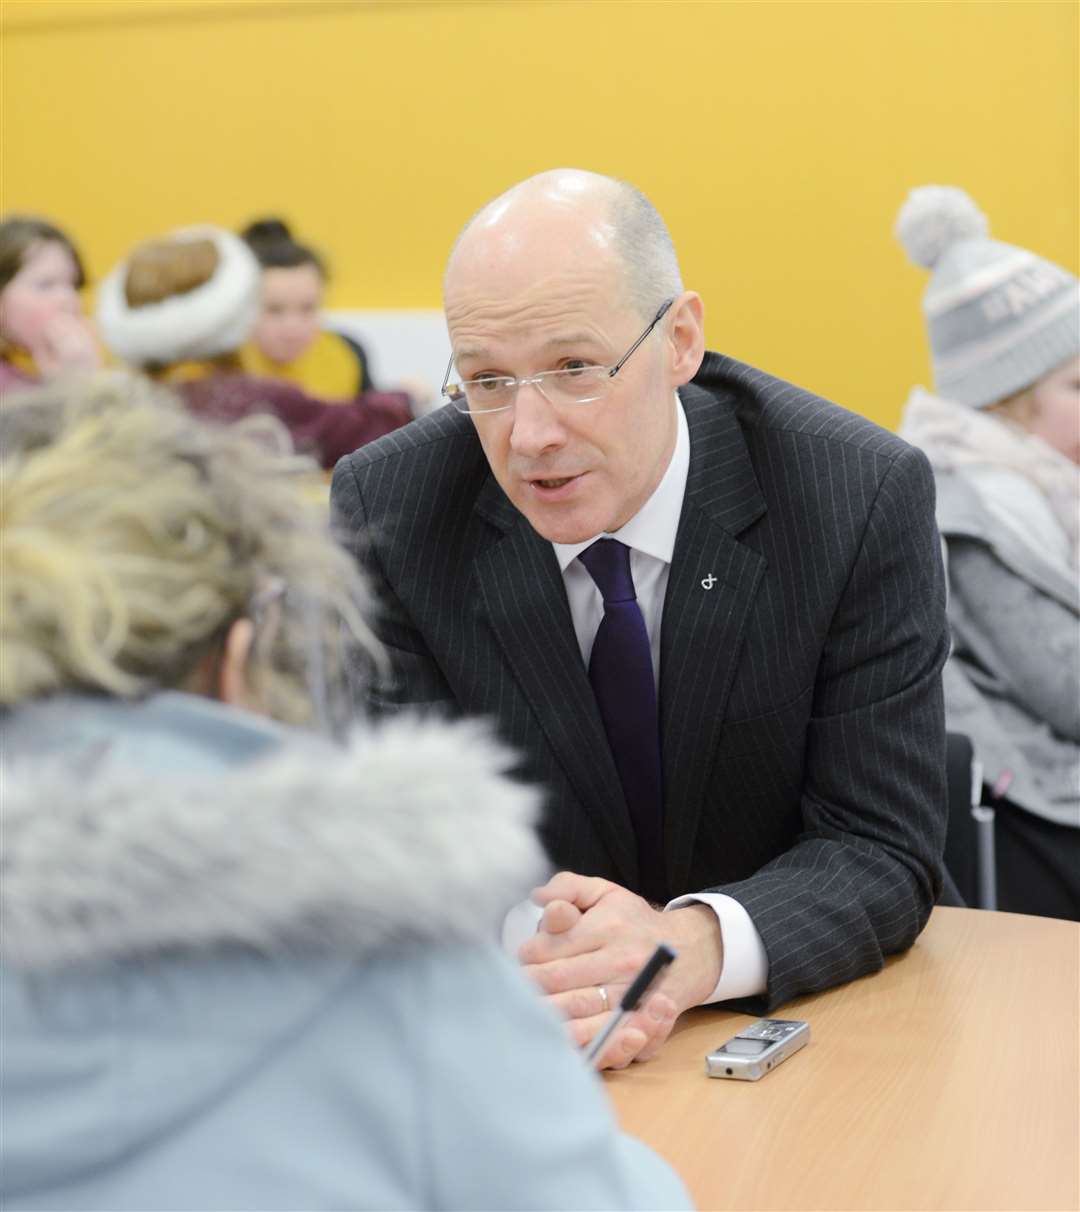 Deputy Scottish First Minister John Swinney visits Primary 1-3 pupils at Central Primary having their free school lunches..Picture: Alison White. Image No.027916.